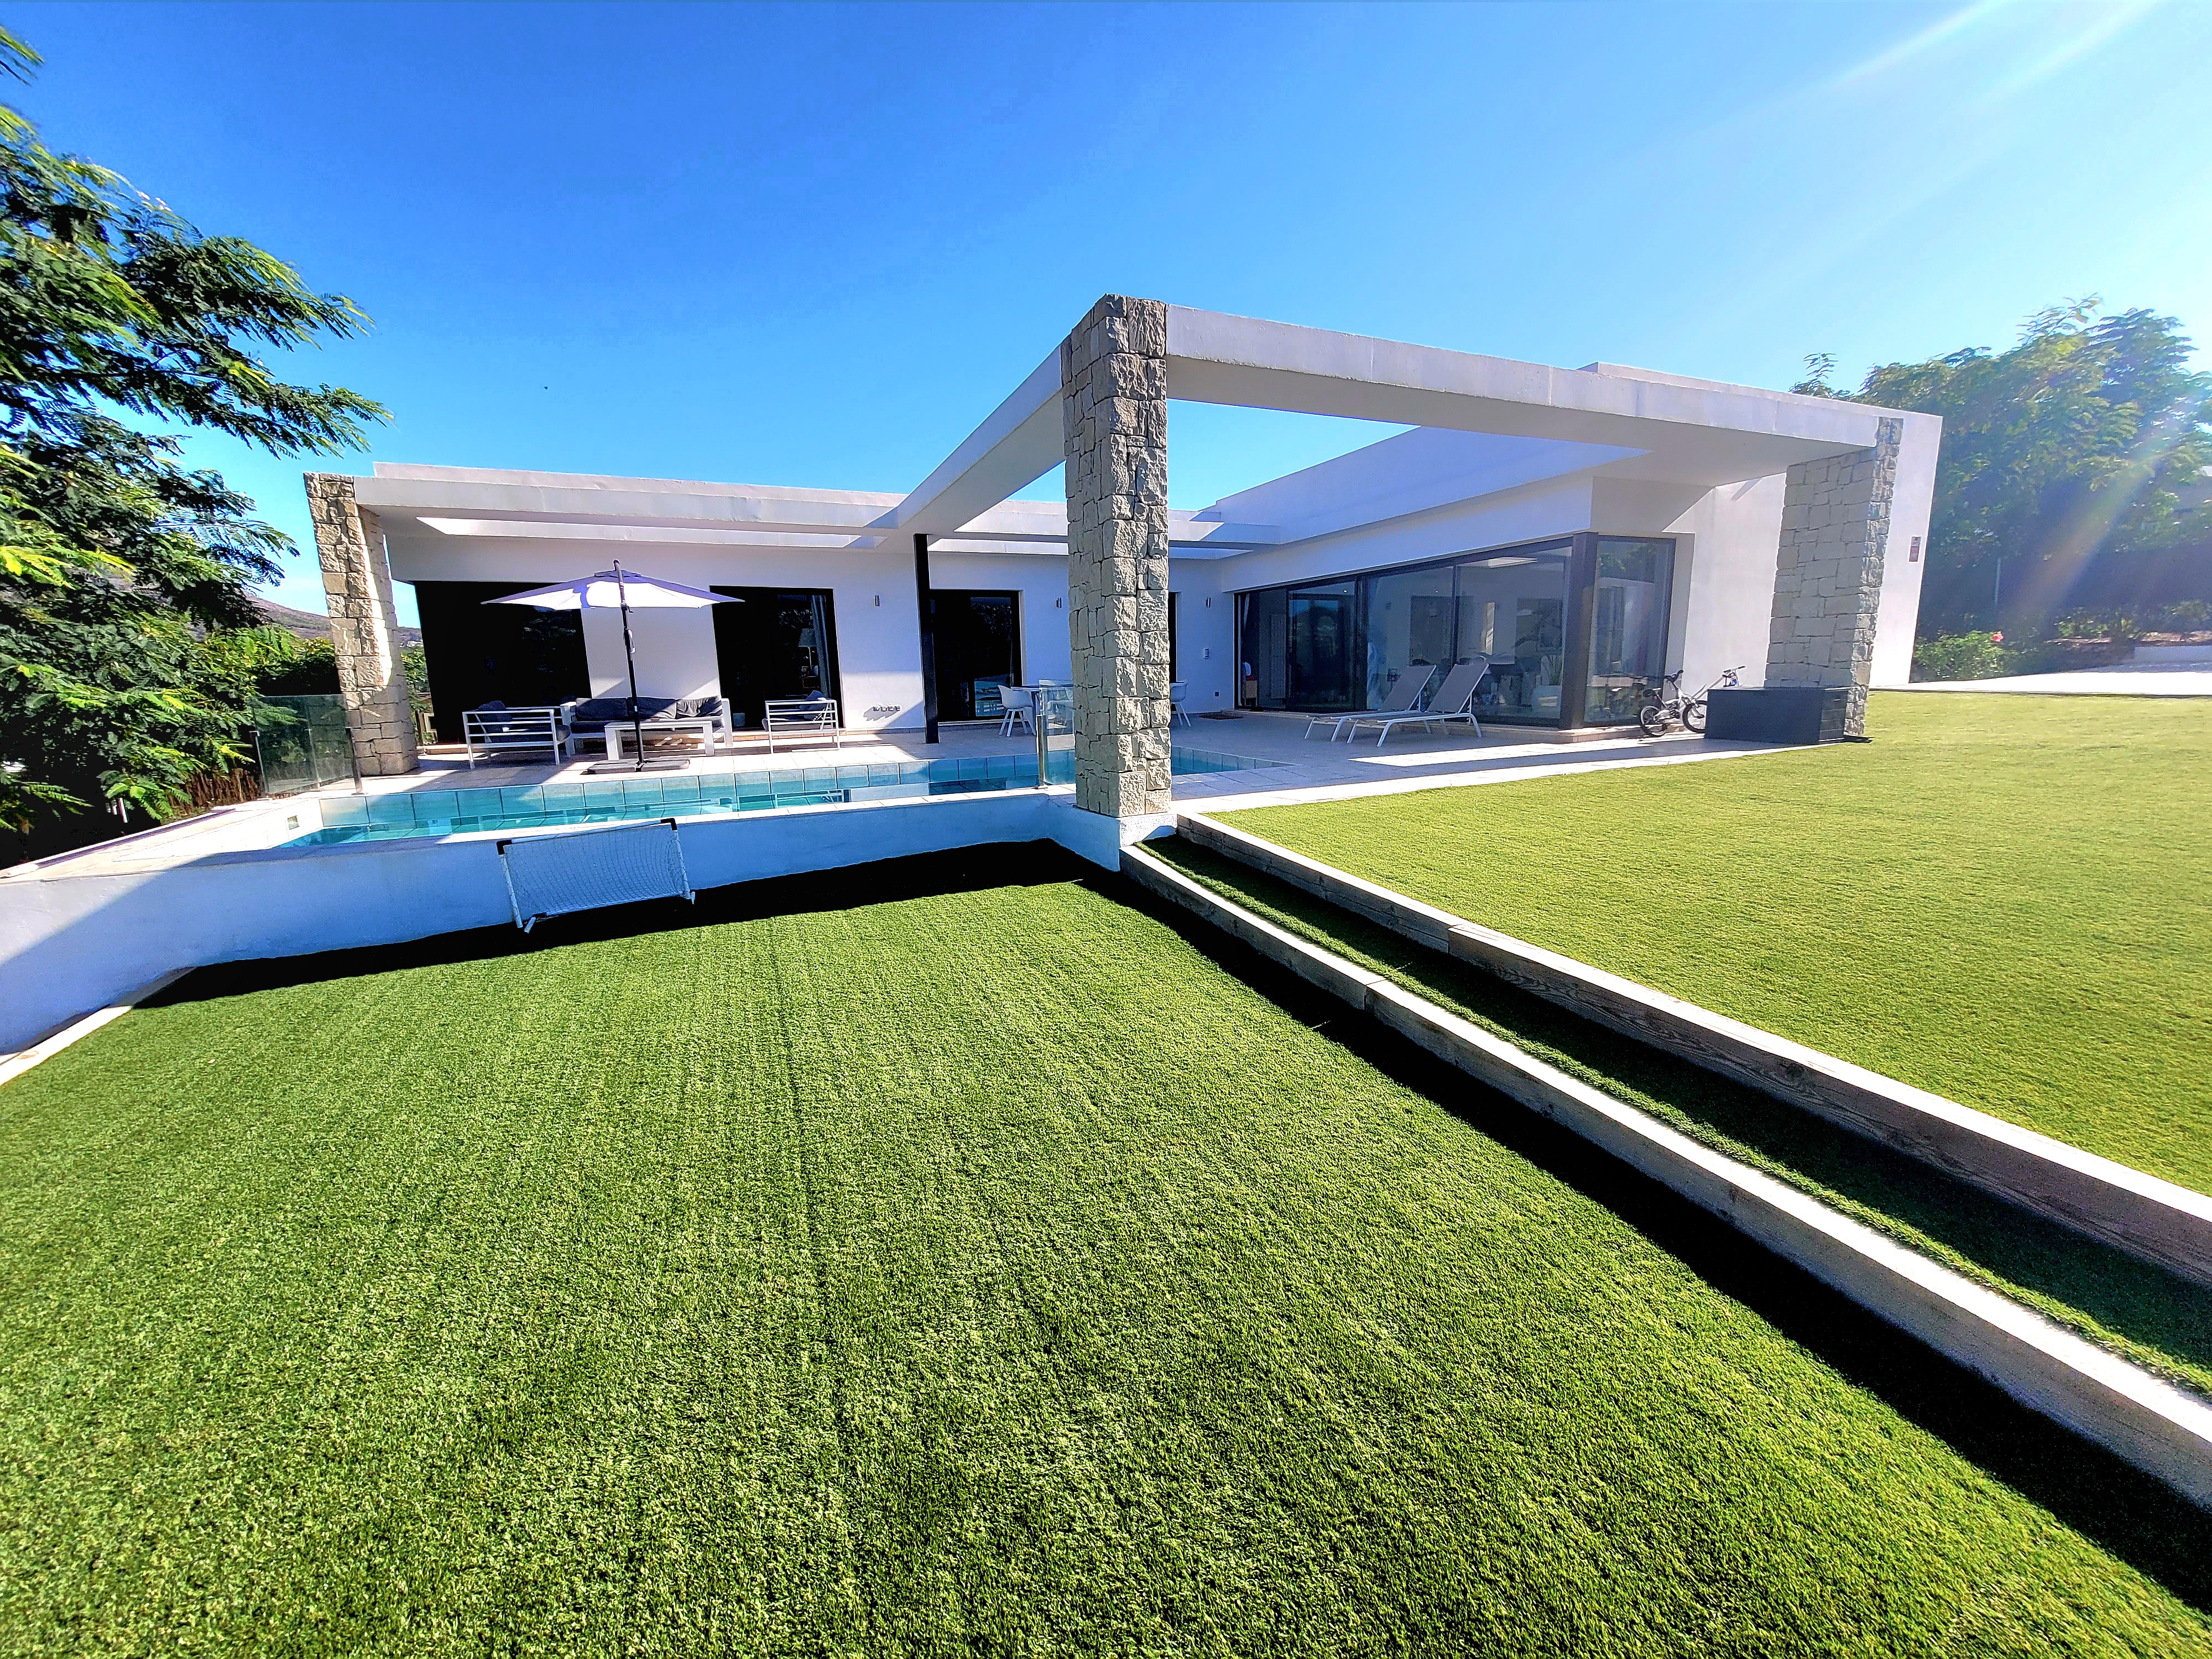 Luxury villa with 5 bedrooms and private pool